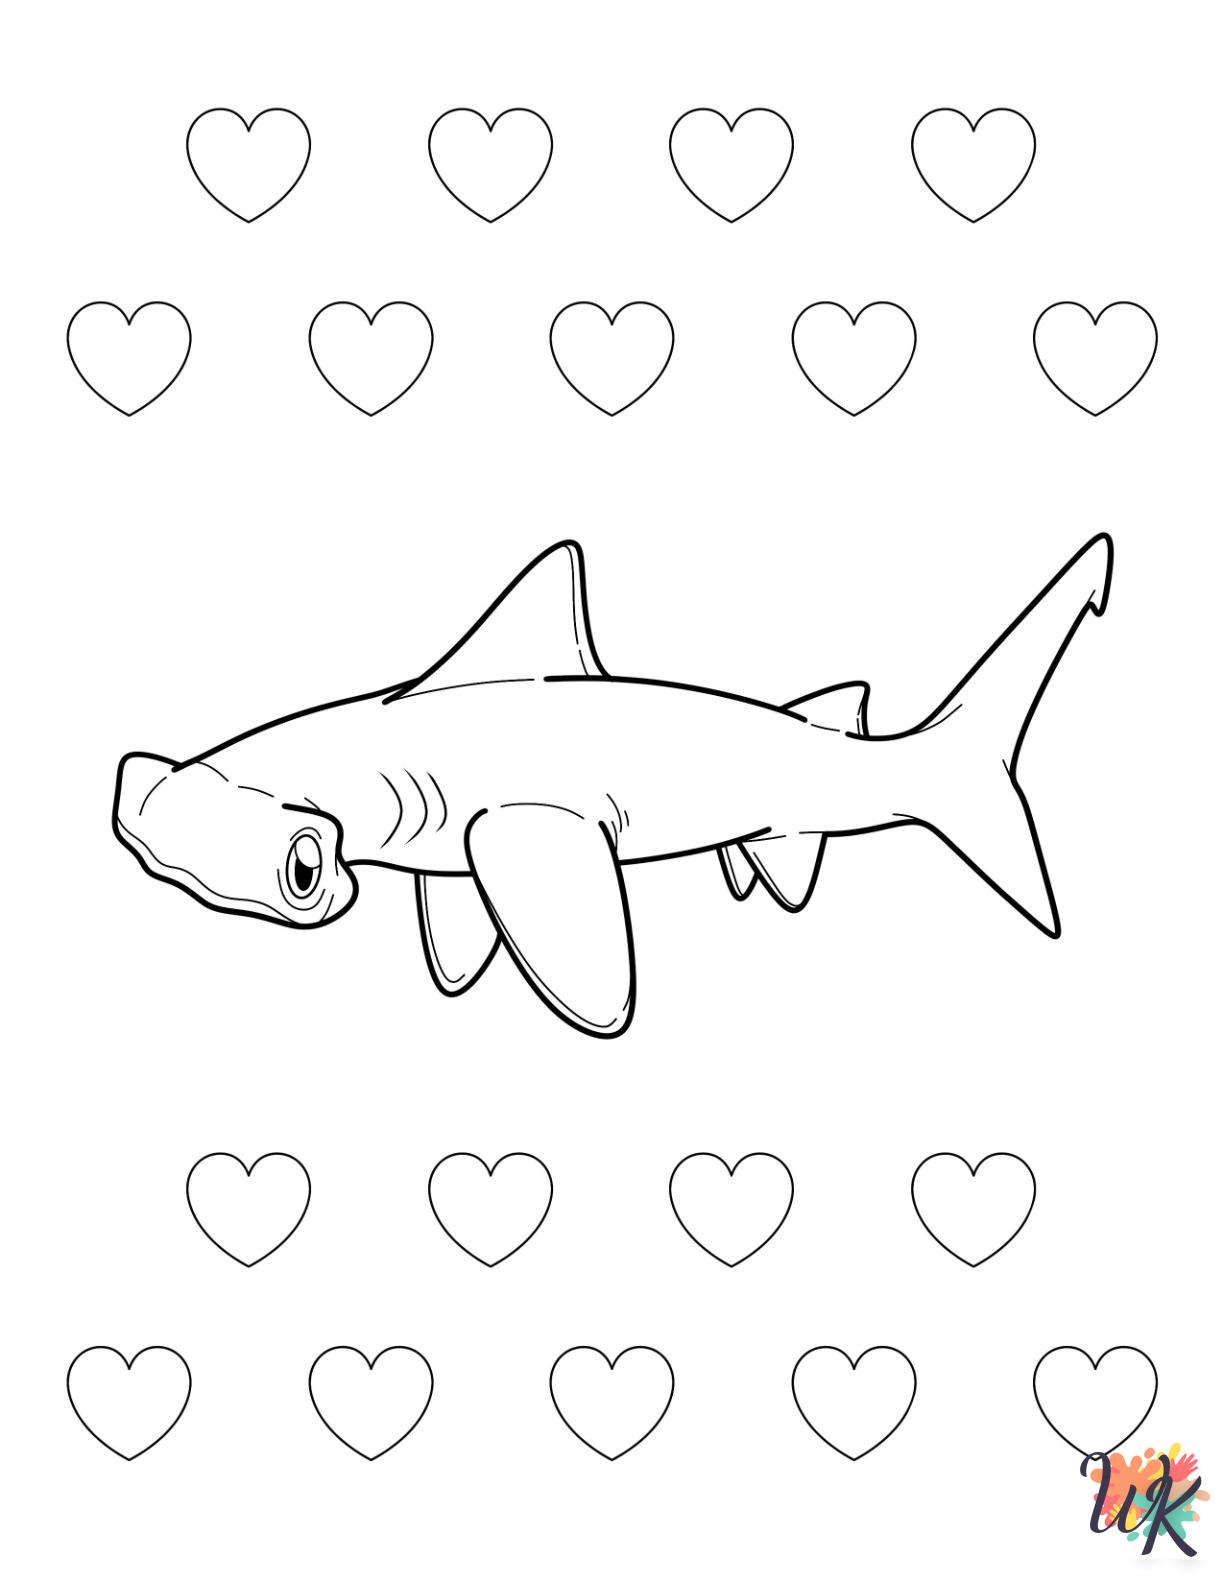 Hammerhead Shark coloring pages to print